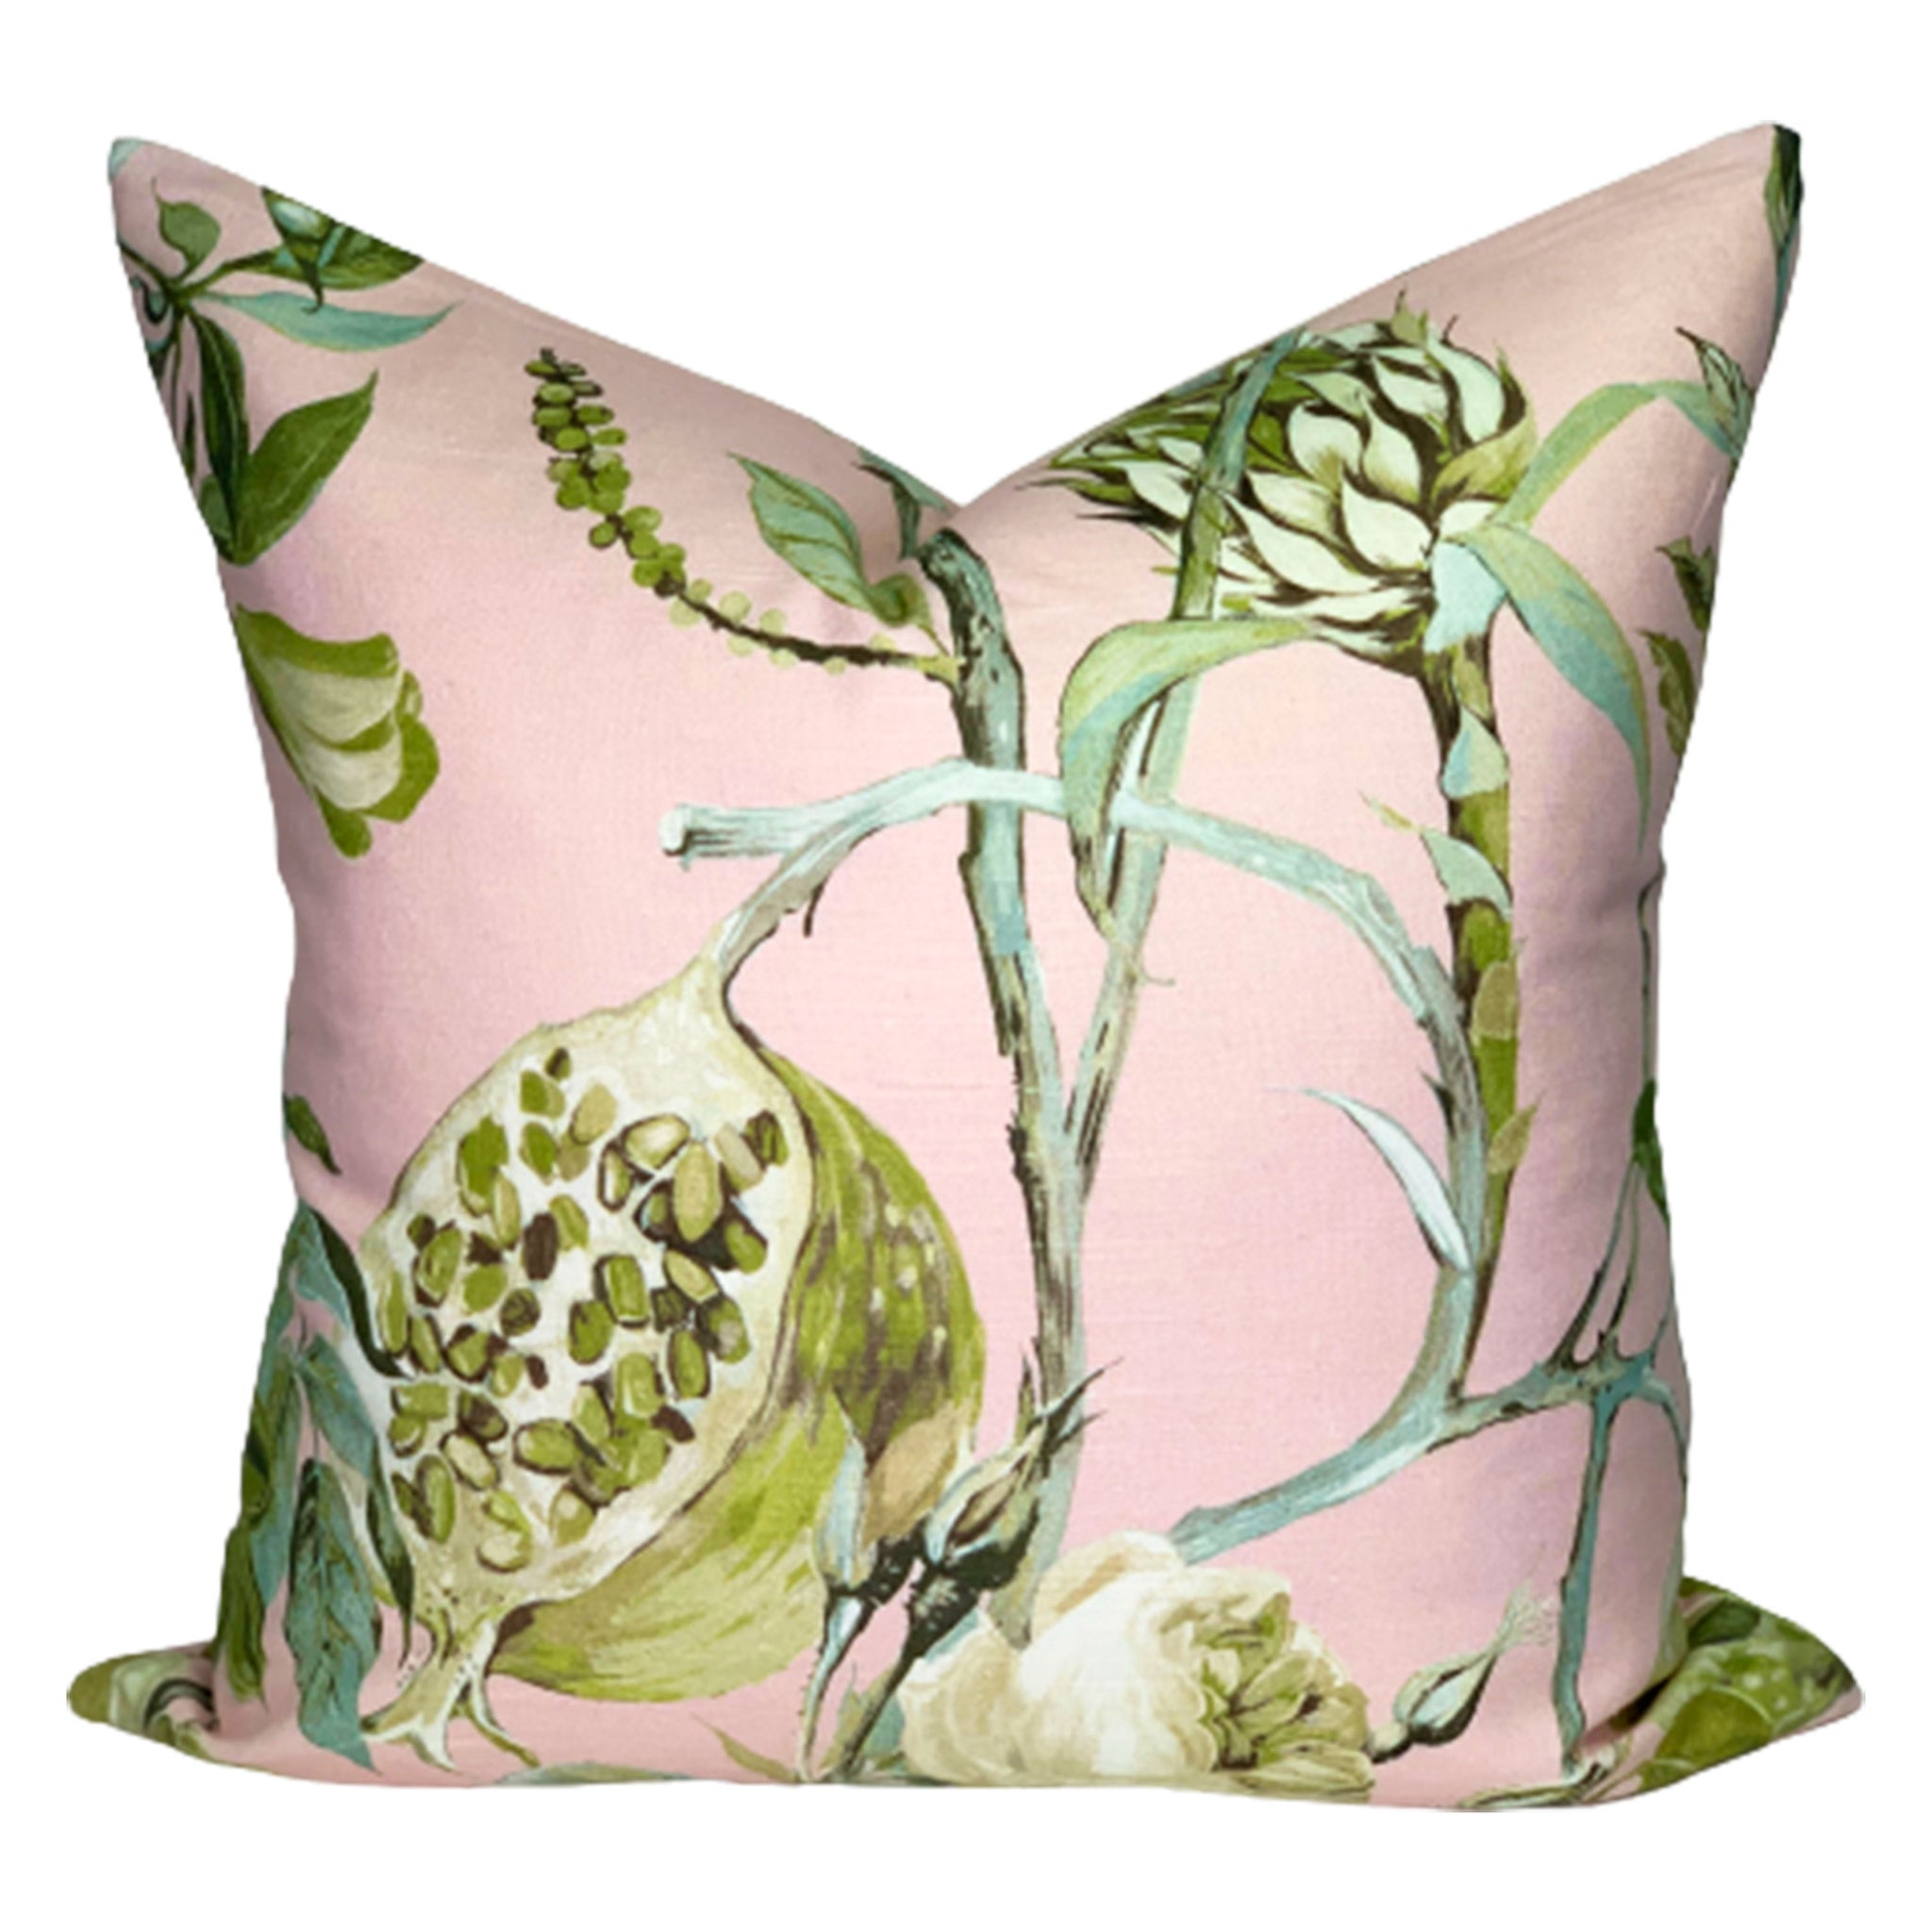 Oasis Pillow Cover in Flora